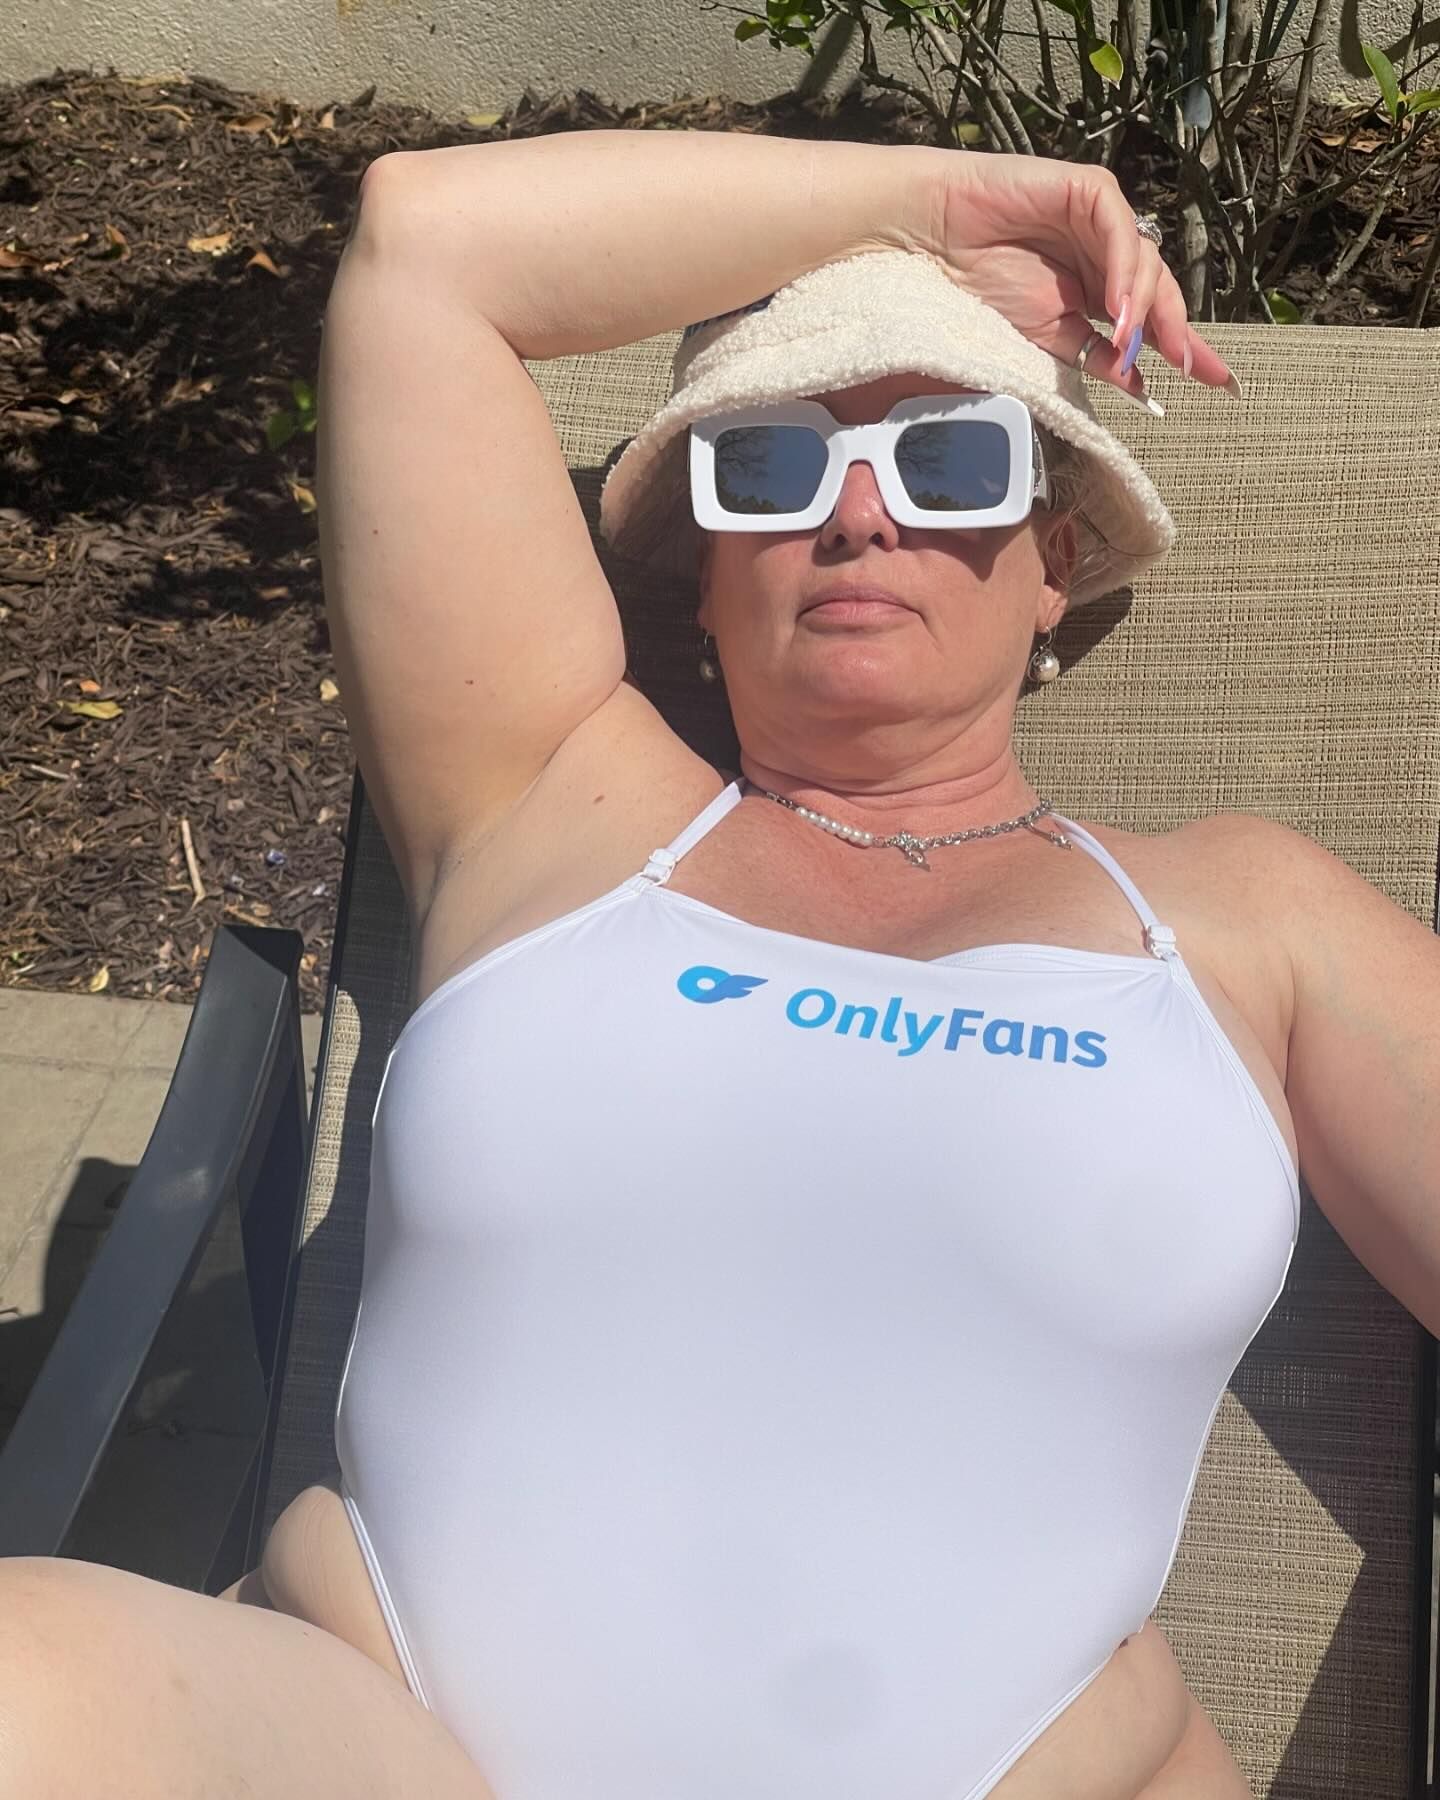 80 degrees in the sun…who wants to help me put sunblock on?
#soakingupthesun 
#onlyfans 
#moncheritime